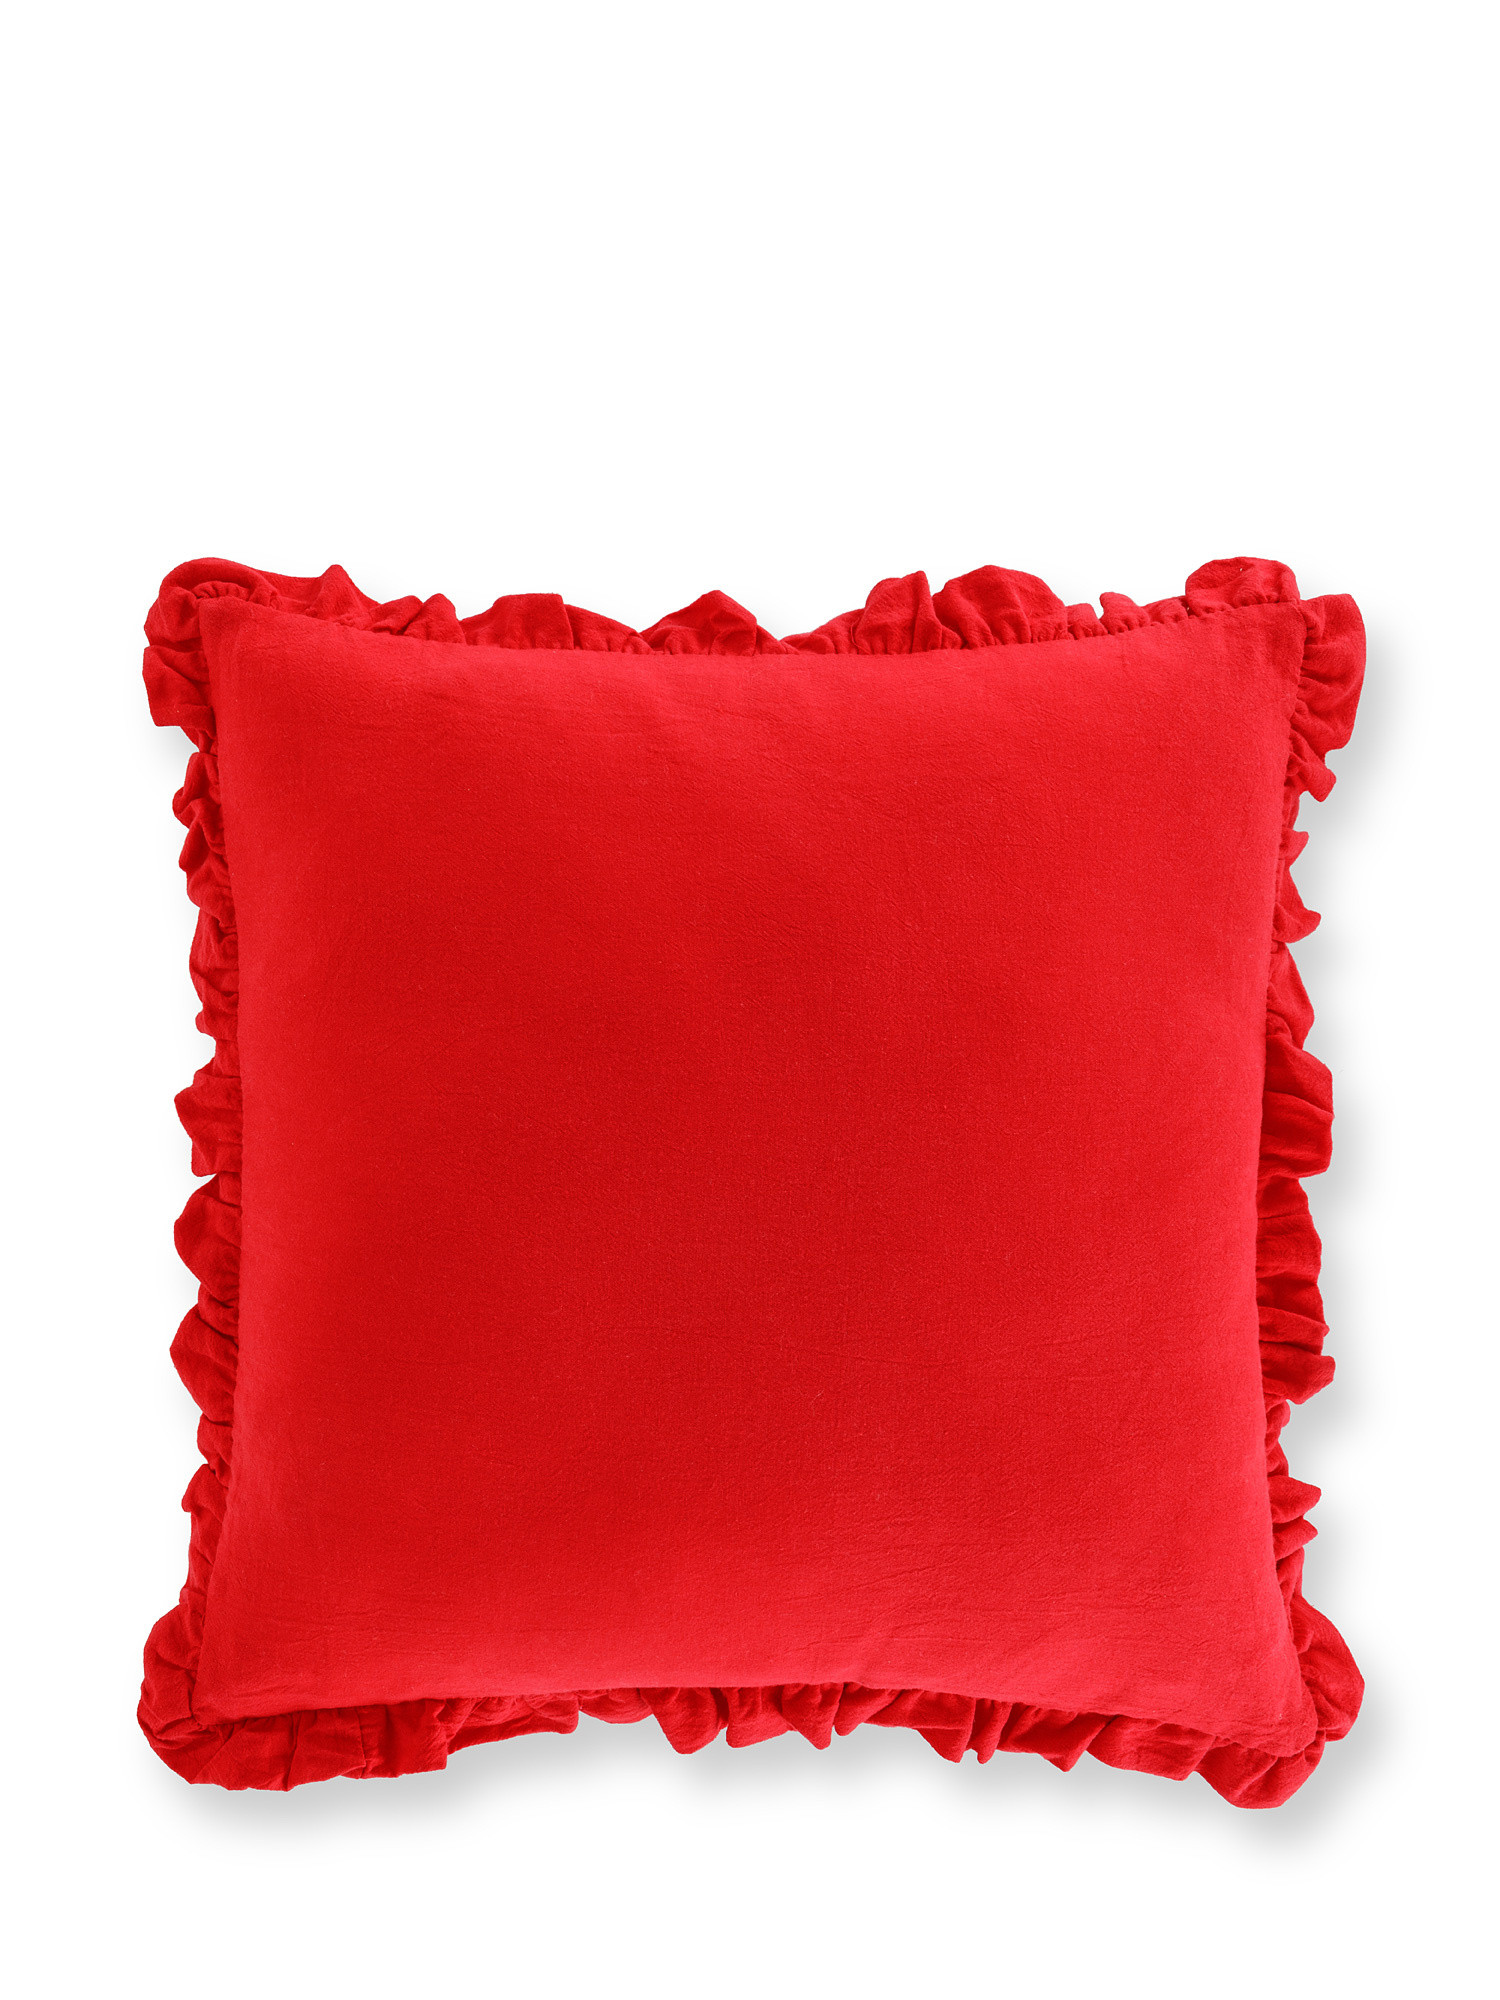 Cotton cushion with ruffles 45x45cm, Red, large image number 0